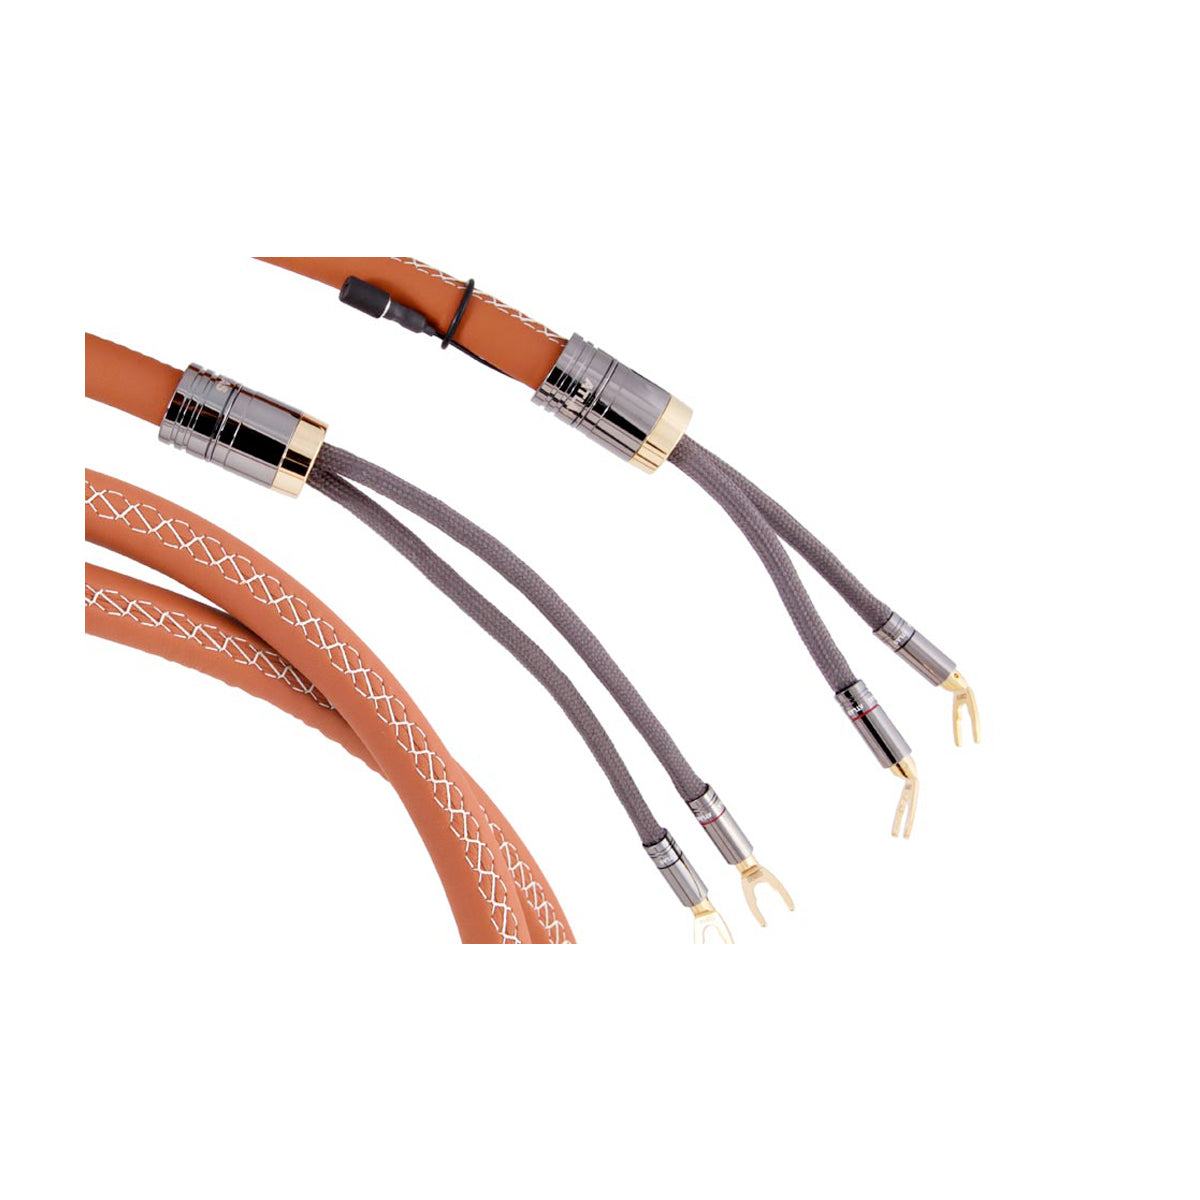 Atlas ASIMI Luxe Speaker Cable - The Audio Experts